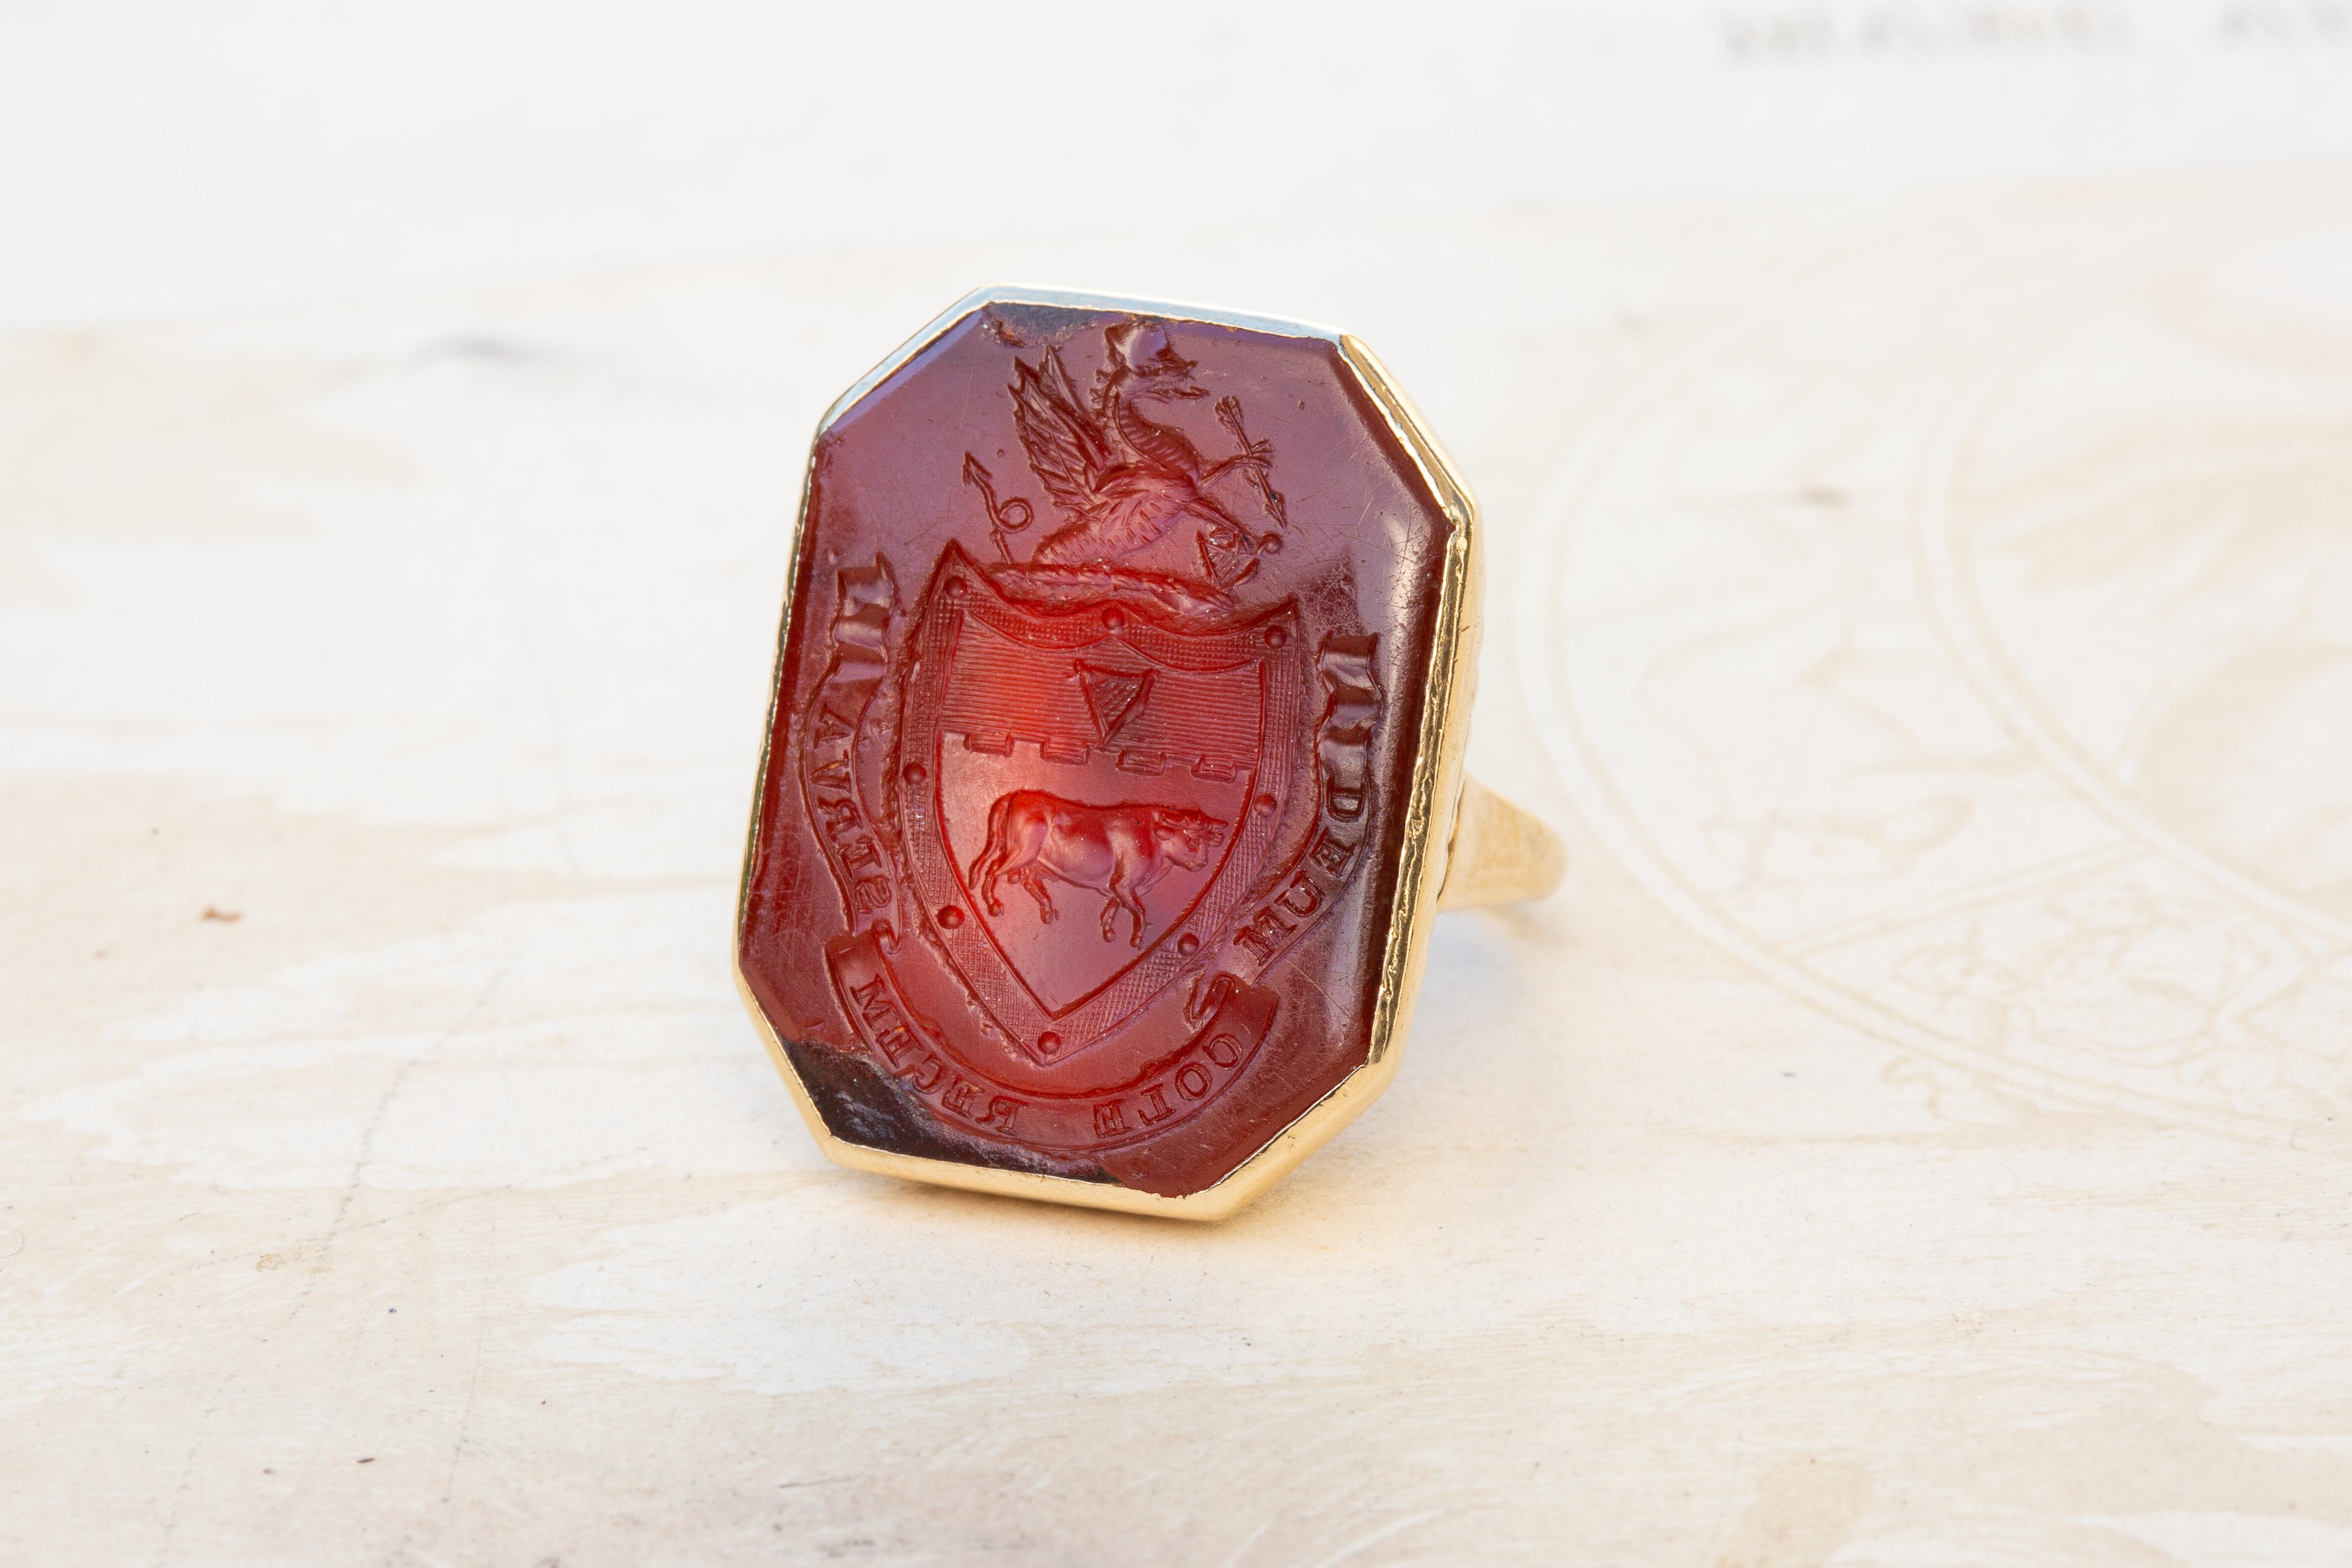 Octagon Cut Antique Georgian Noble Irish 'Cole' Family Coat of Arms Signet Ring Earl's Ring For Sale